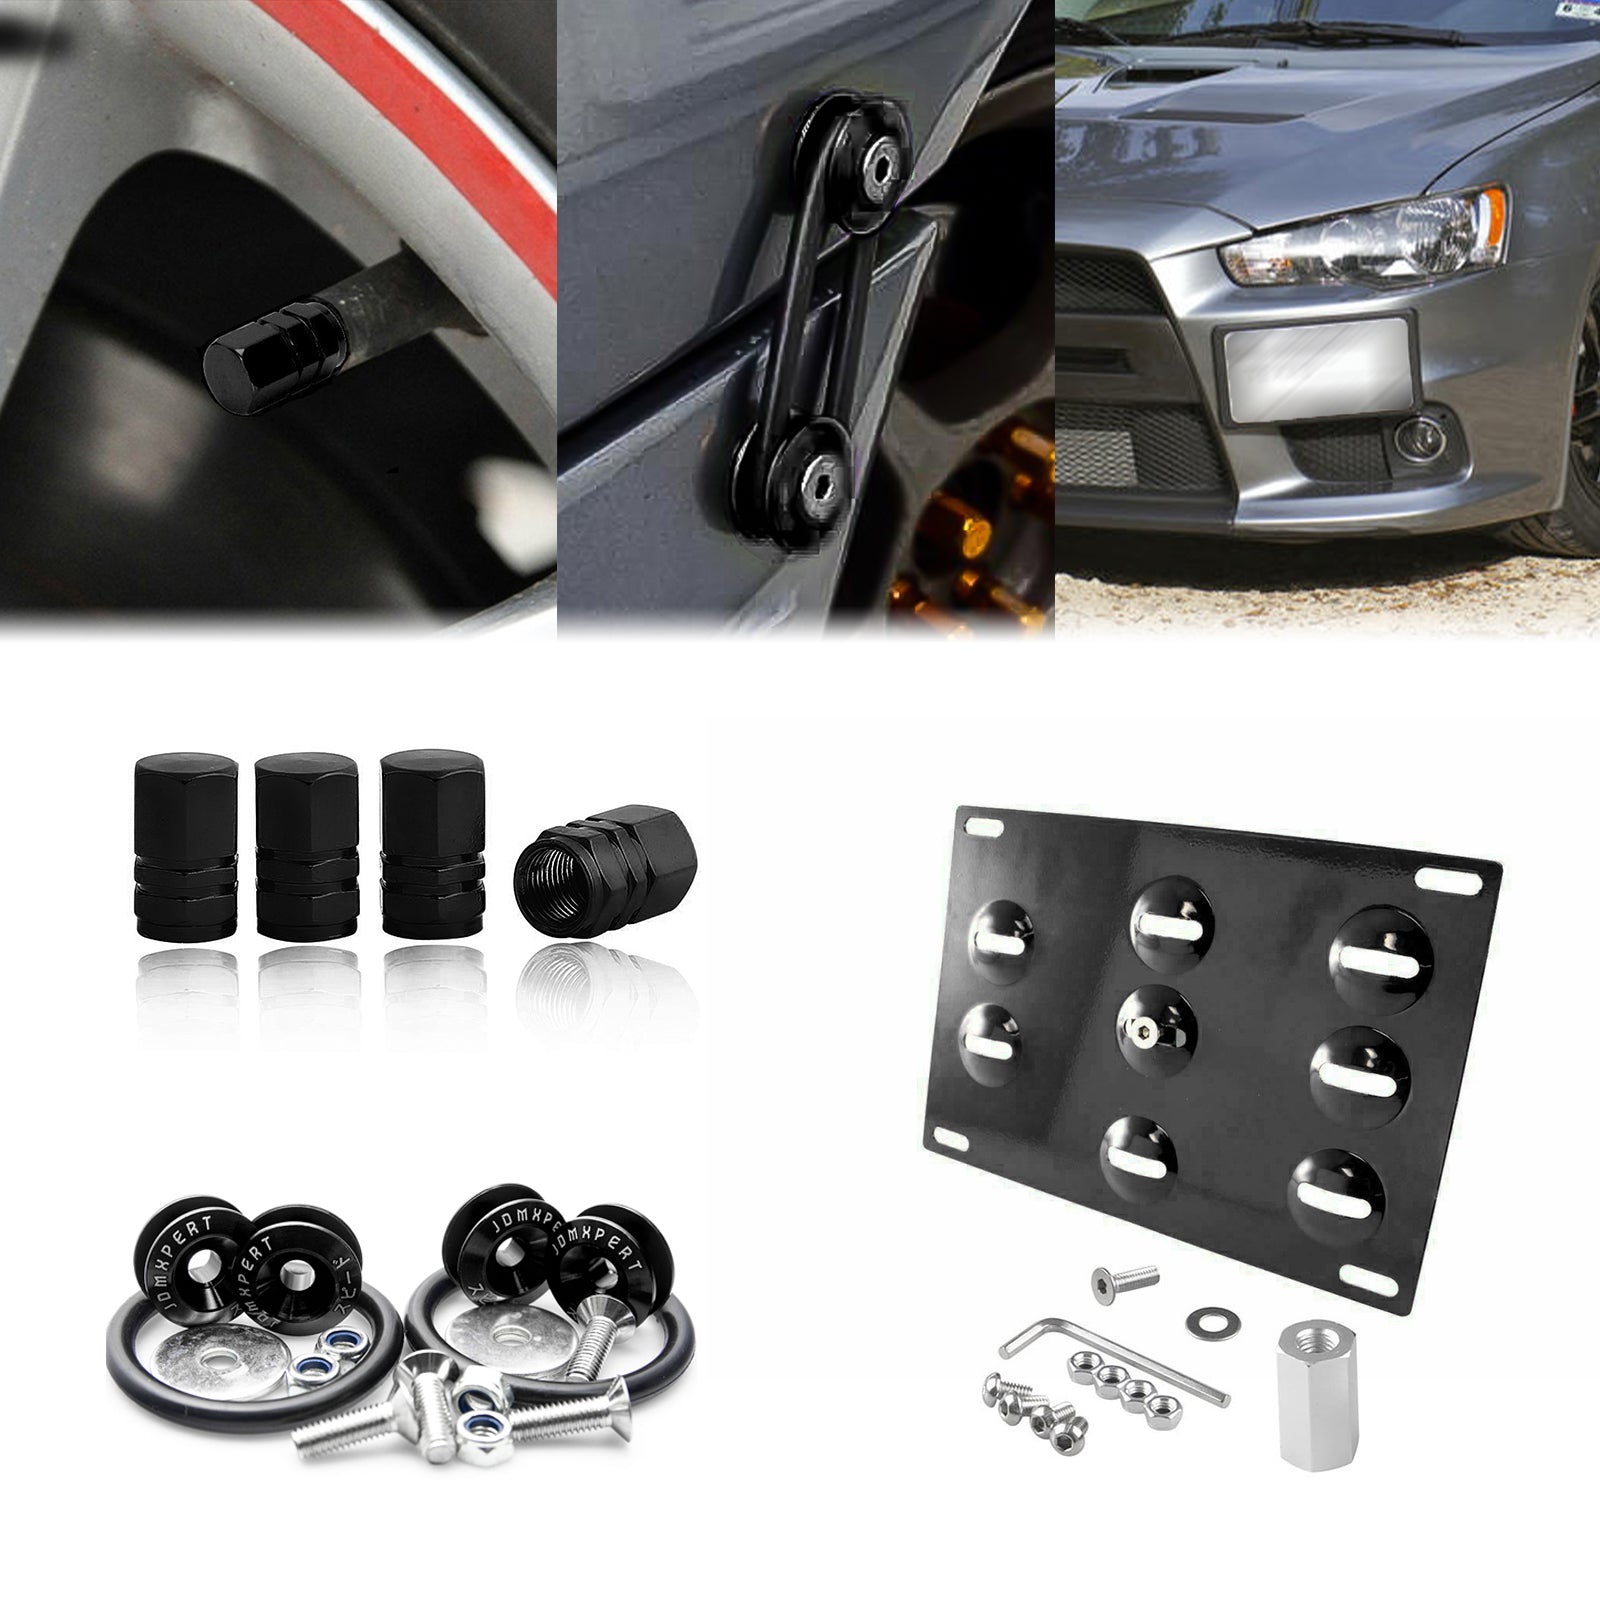 Set Tow Hook License Plate + Air Valve + Release Fastener For